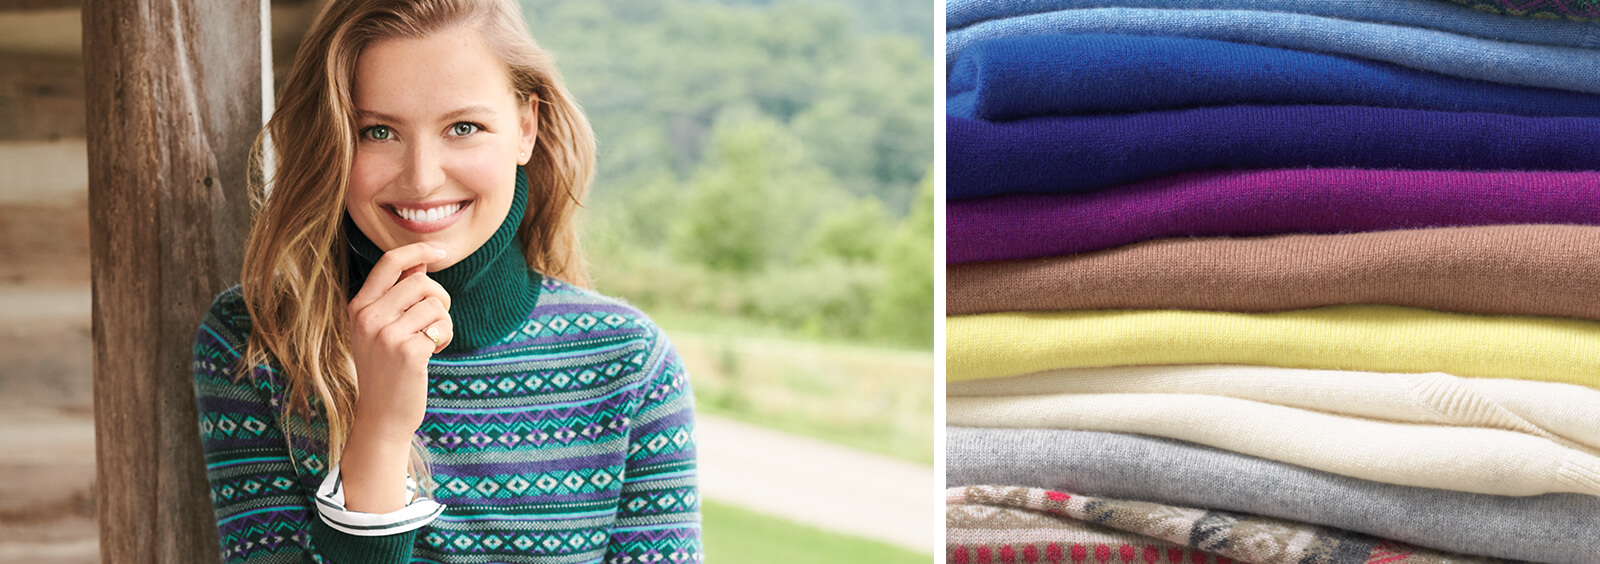 Cashmere Luxury Sweaters: How to Shop and Care for Your Favorite Sweaters